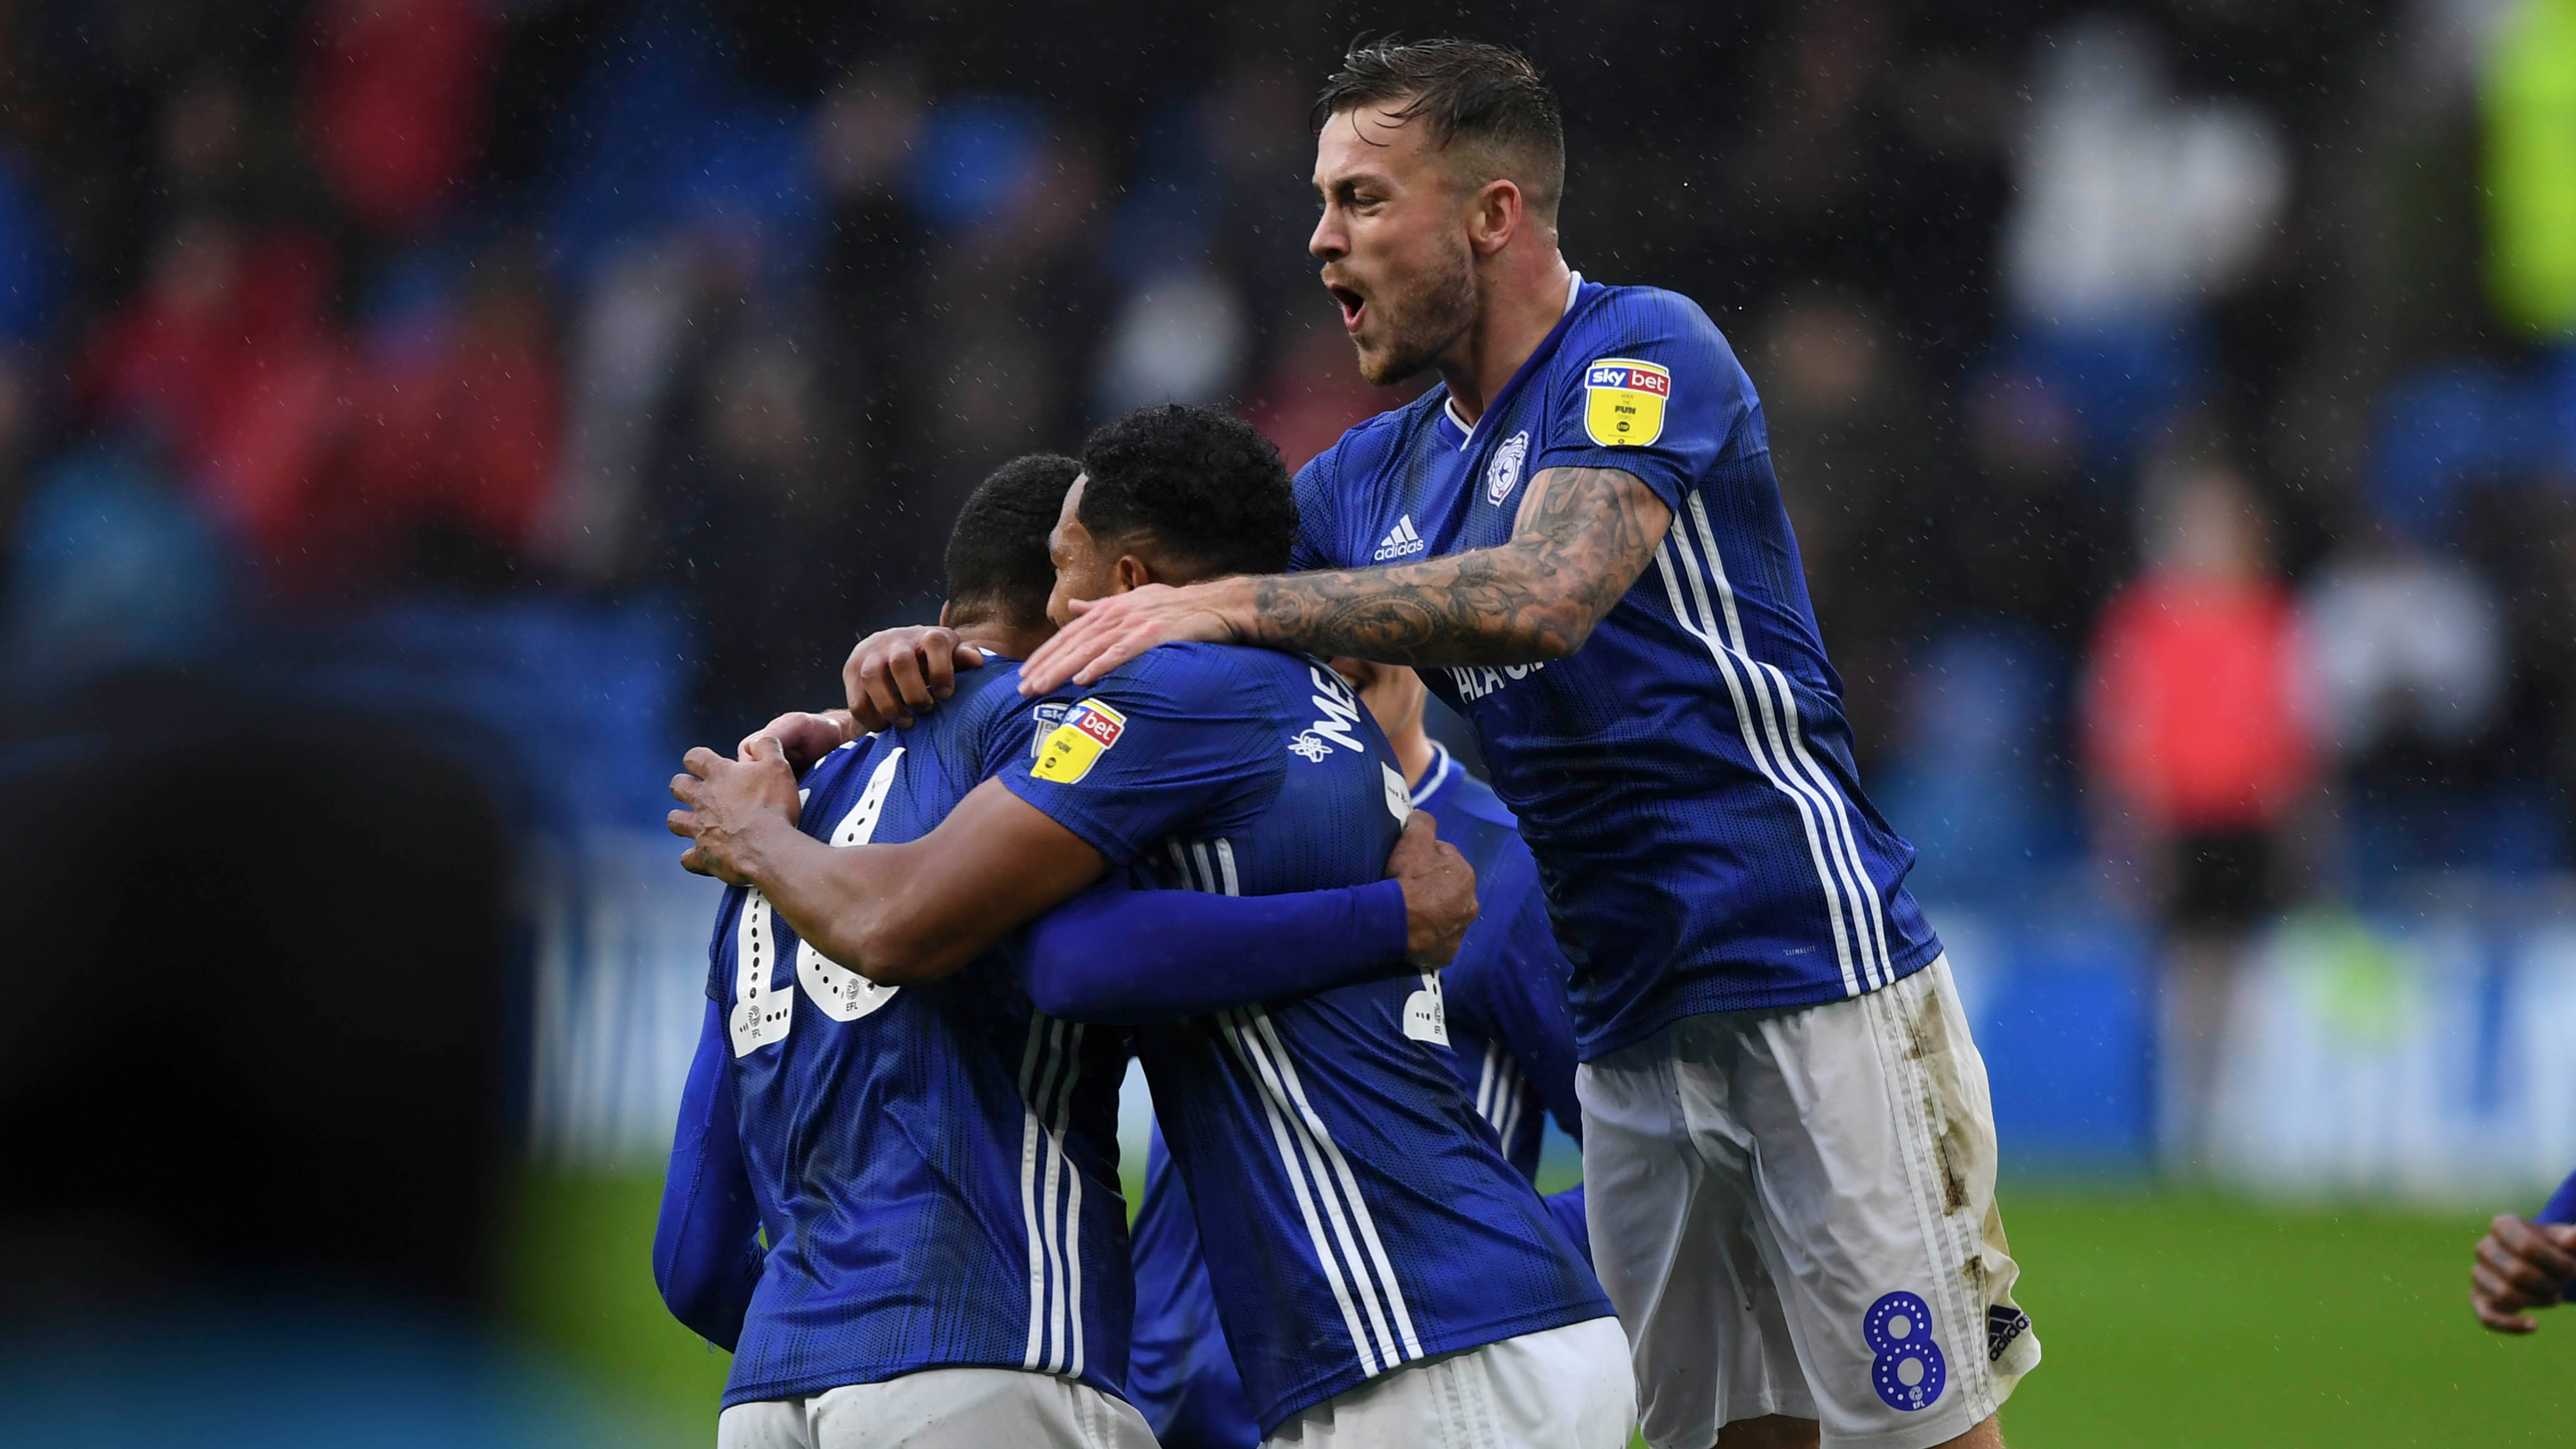 City celebrate Nelson's goal at CCS!